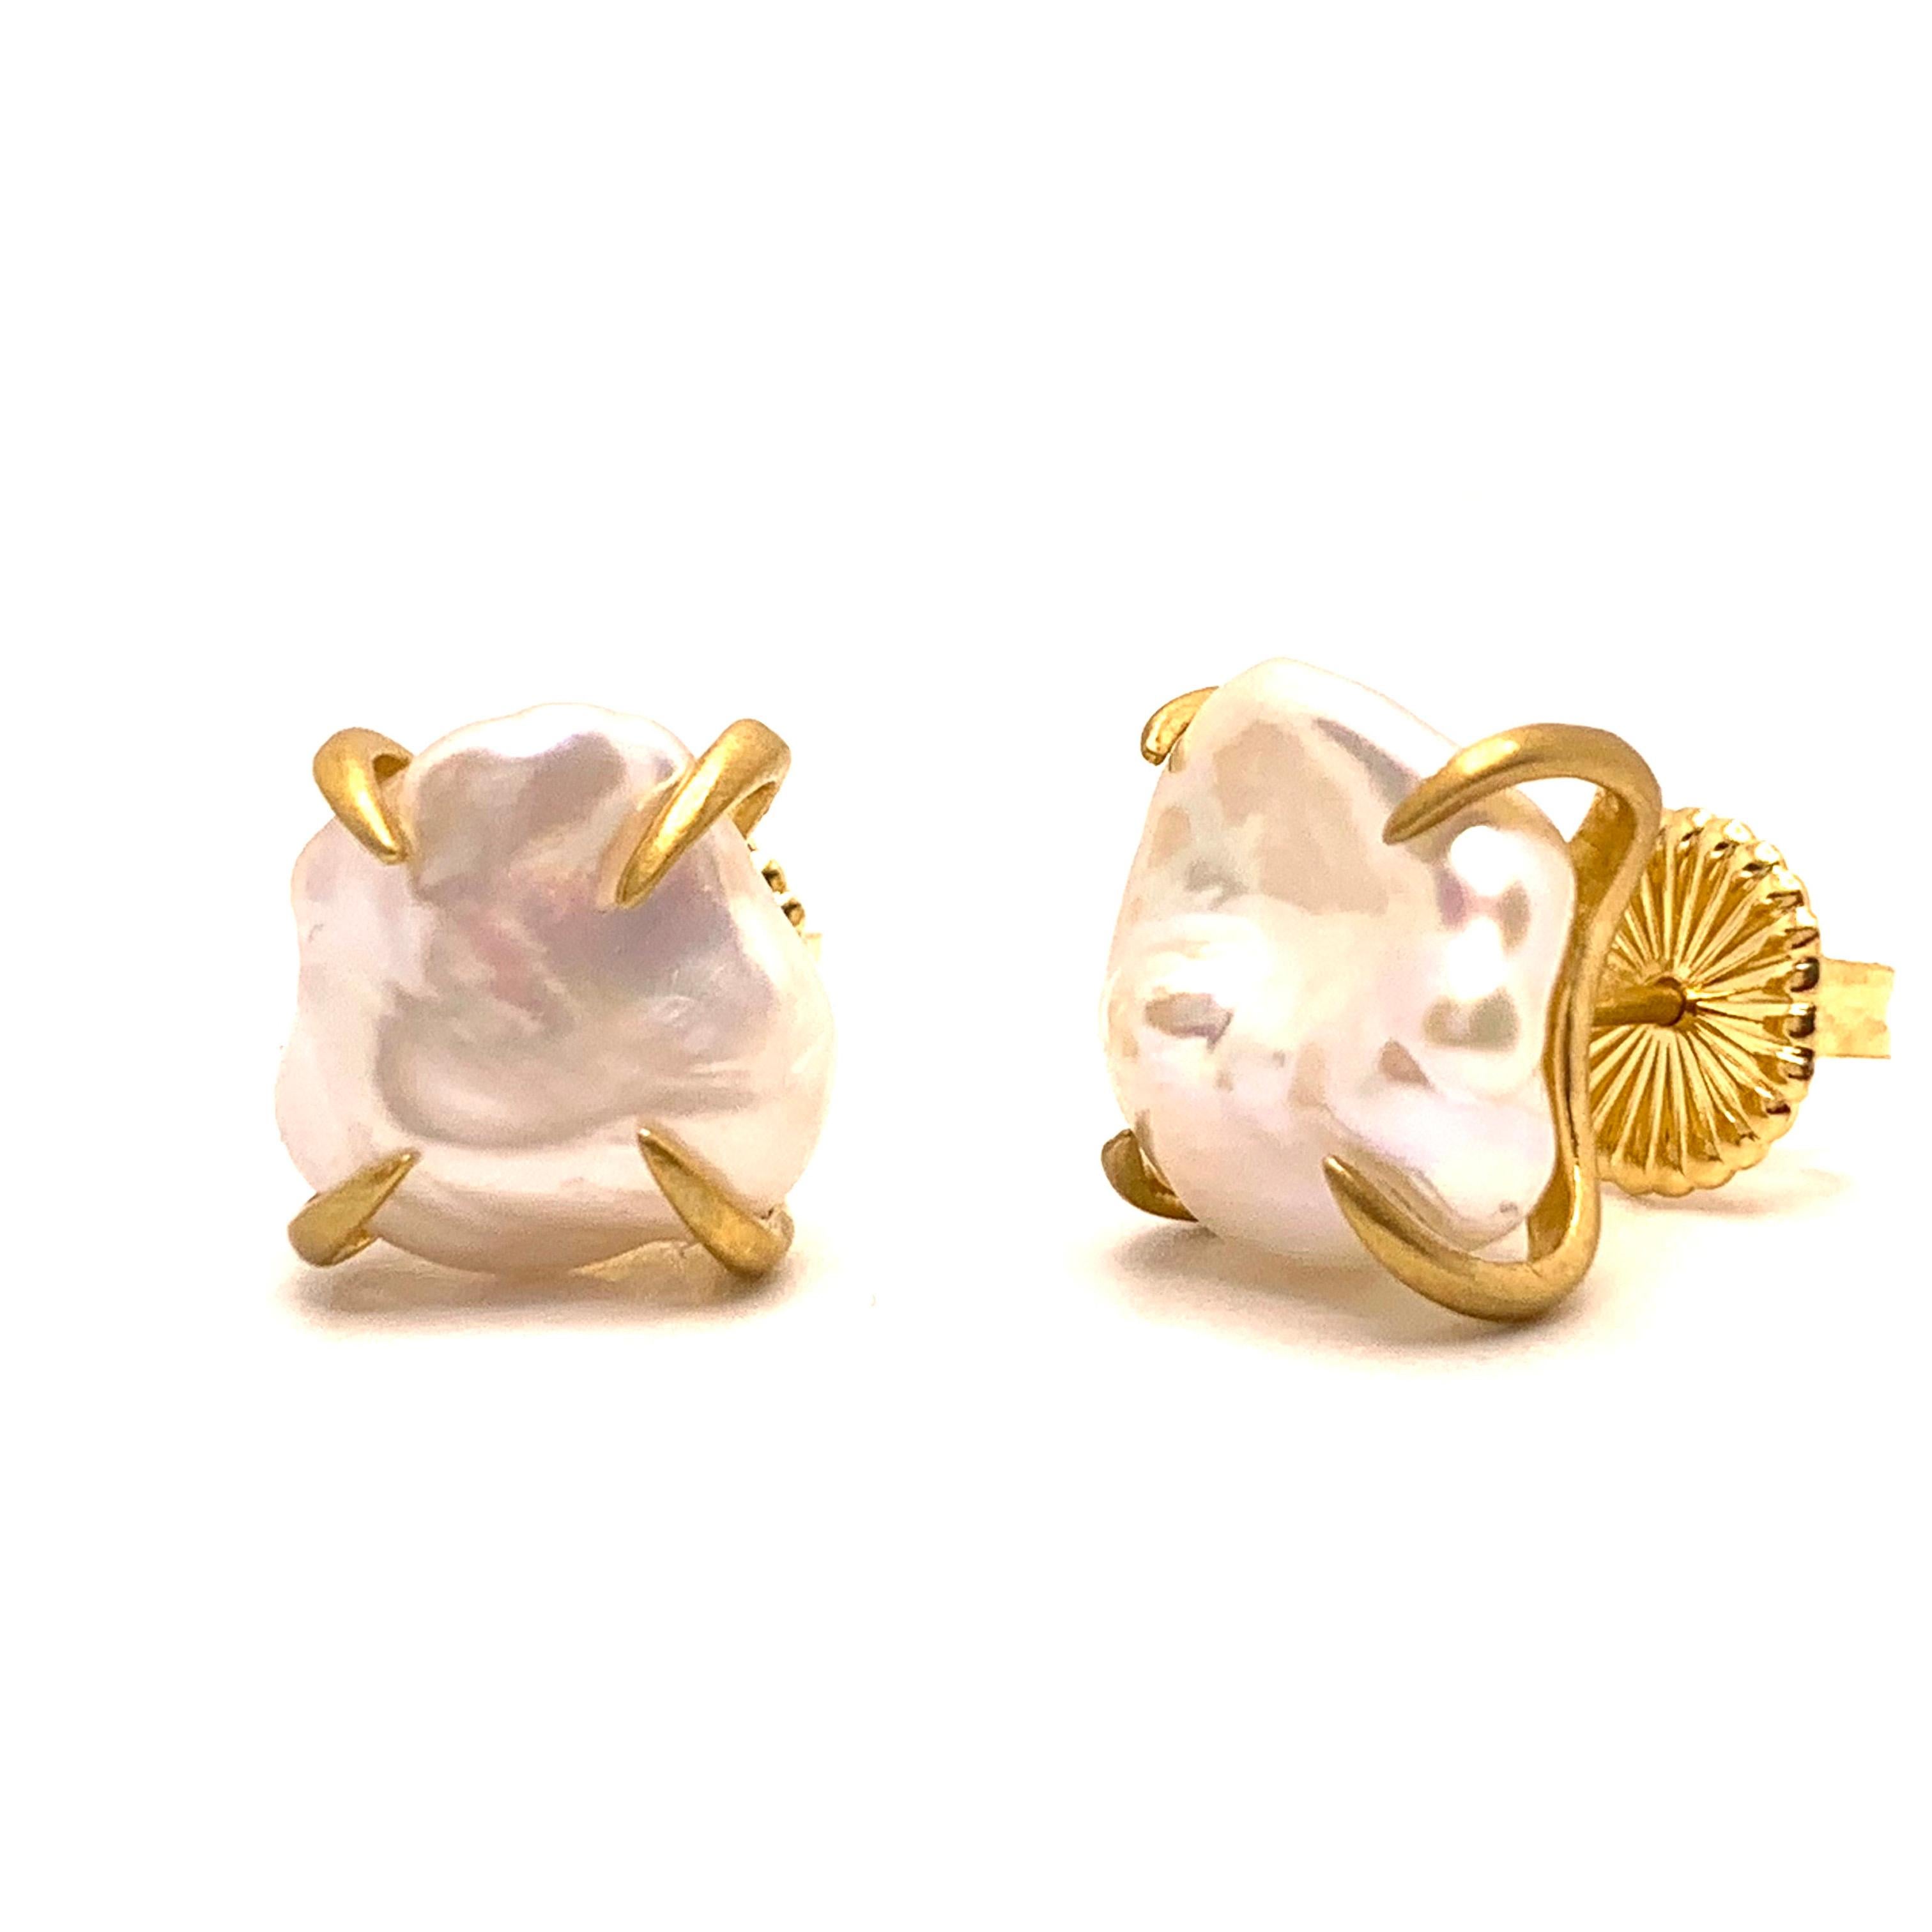 Beautiful pair of lustrous white baroque pearl stud earrings. The pair measures 12-13mm width, handset in 18k yellow gold vermeil over sterling silver (brush satin matte finish). Straight post with large friction back allowing the earrings to sit